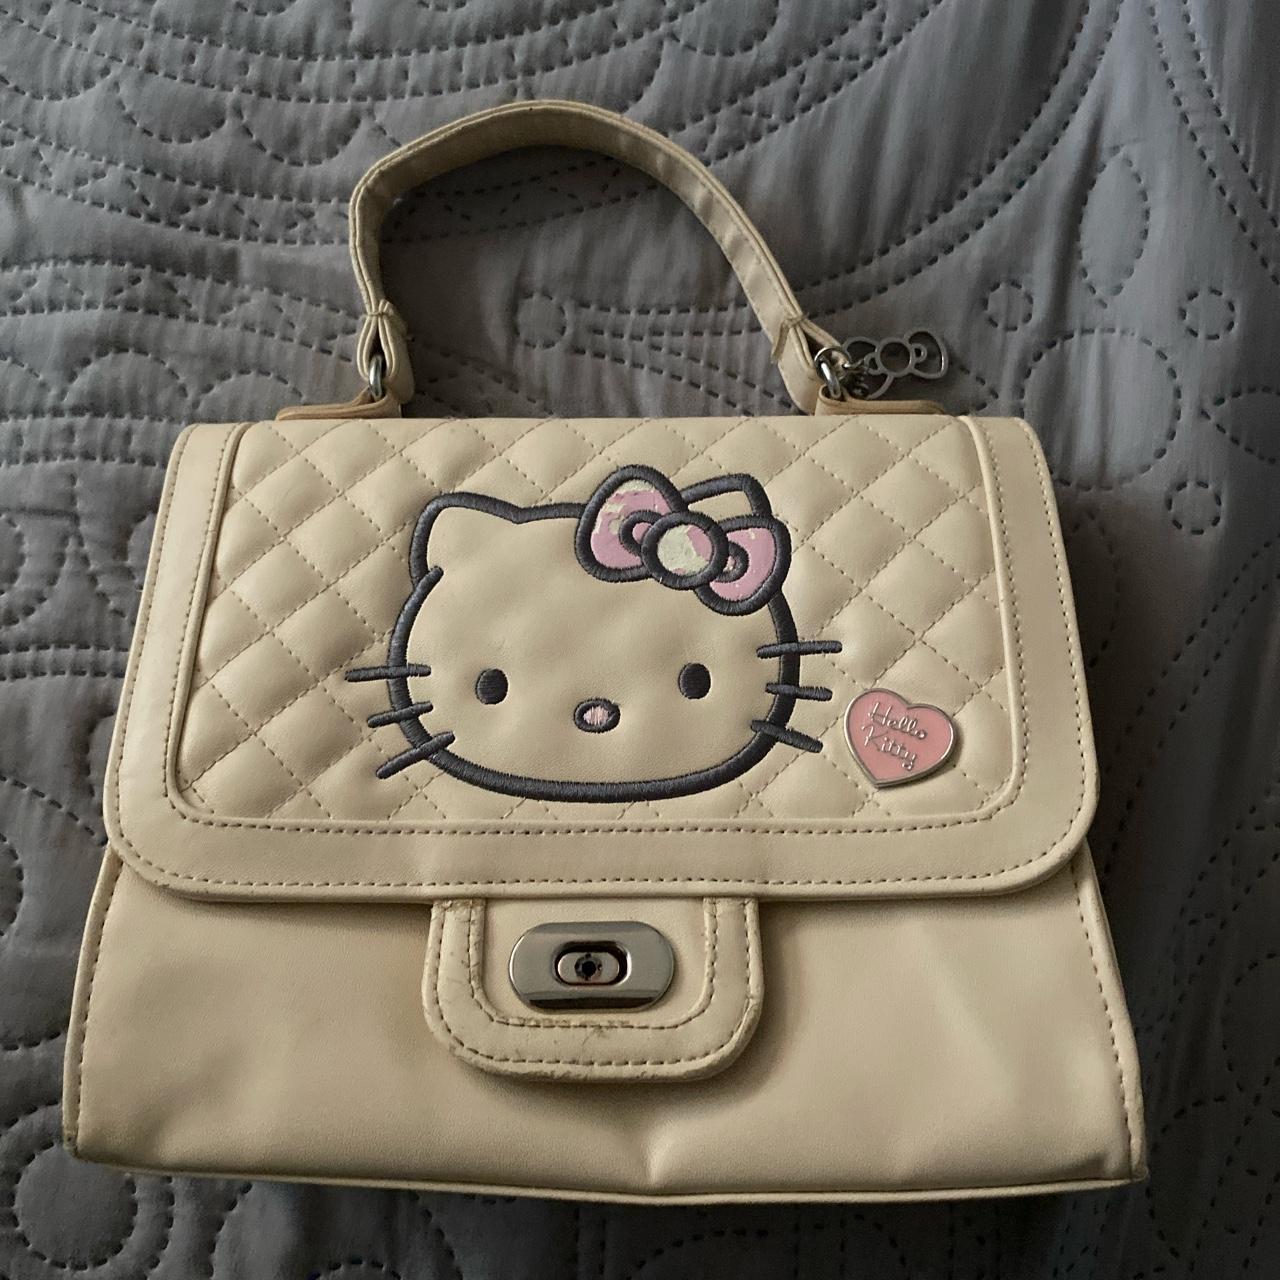 Hello Kitty - Pink Quilted Shoulder Bag 